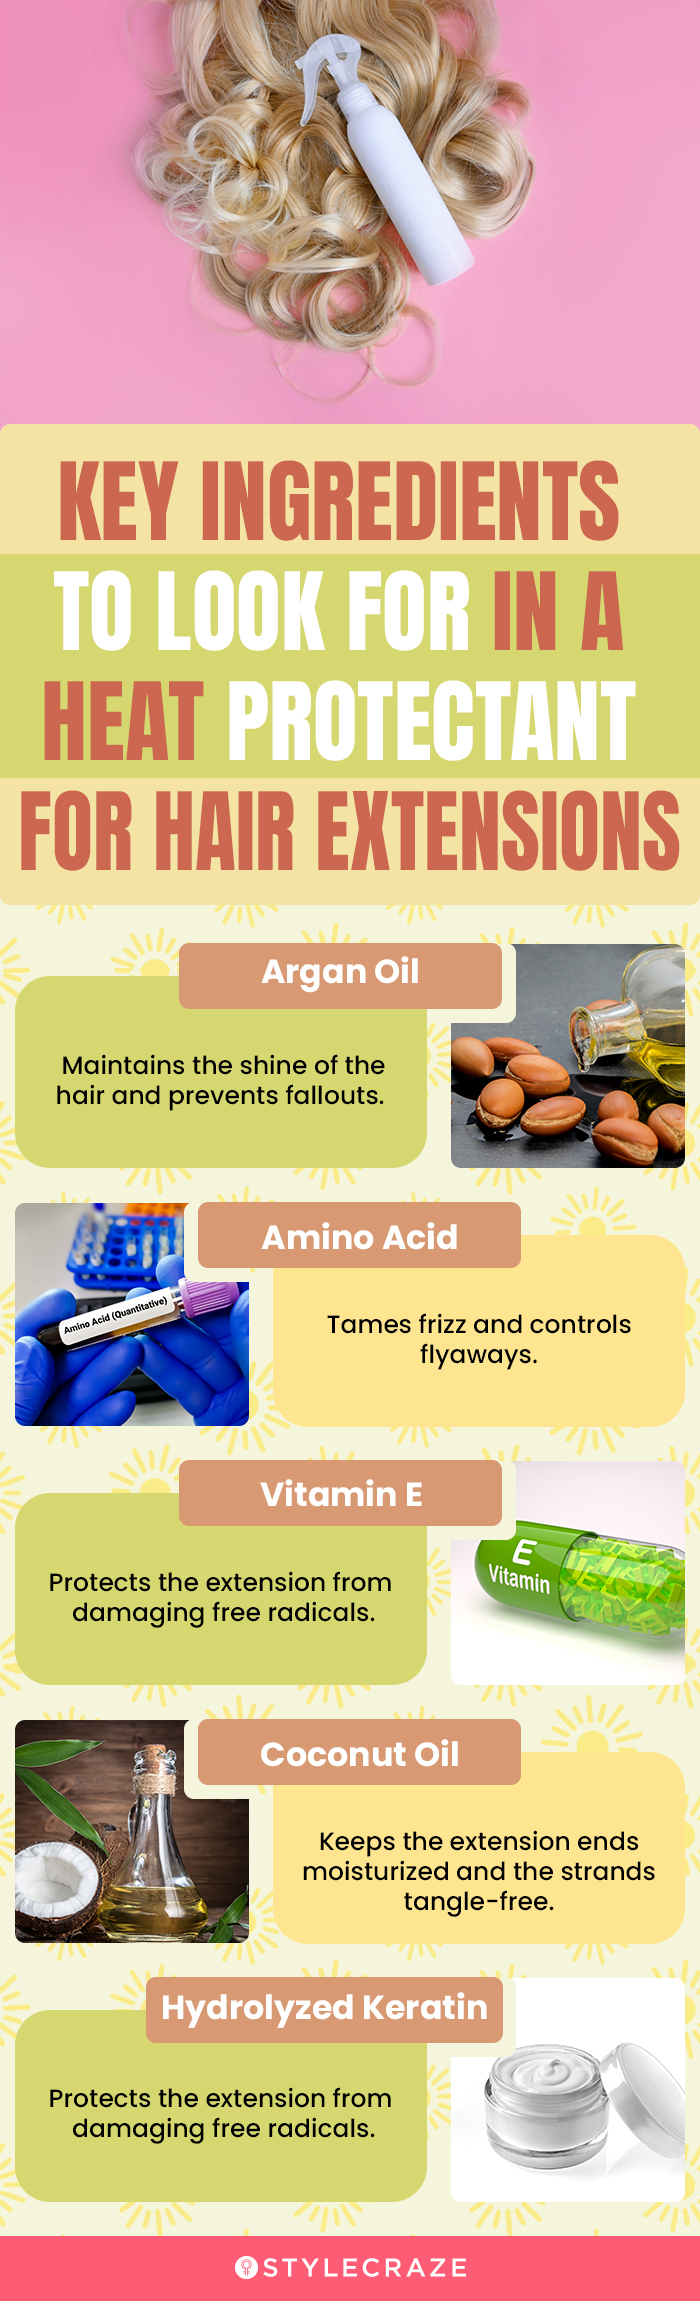 Key Ingredients To Look For In A Heat Protectant For Hair Extensions (infographic)